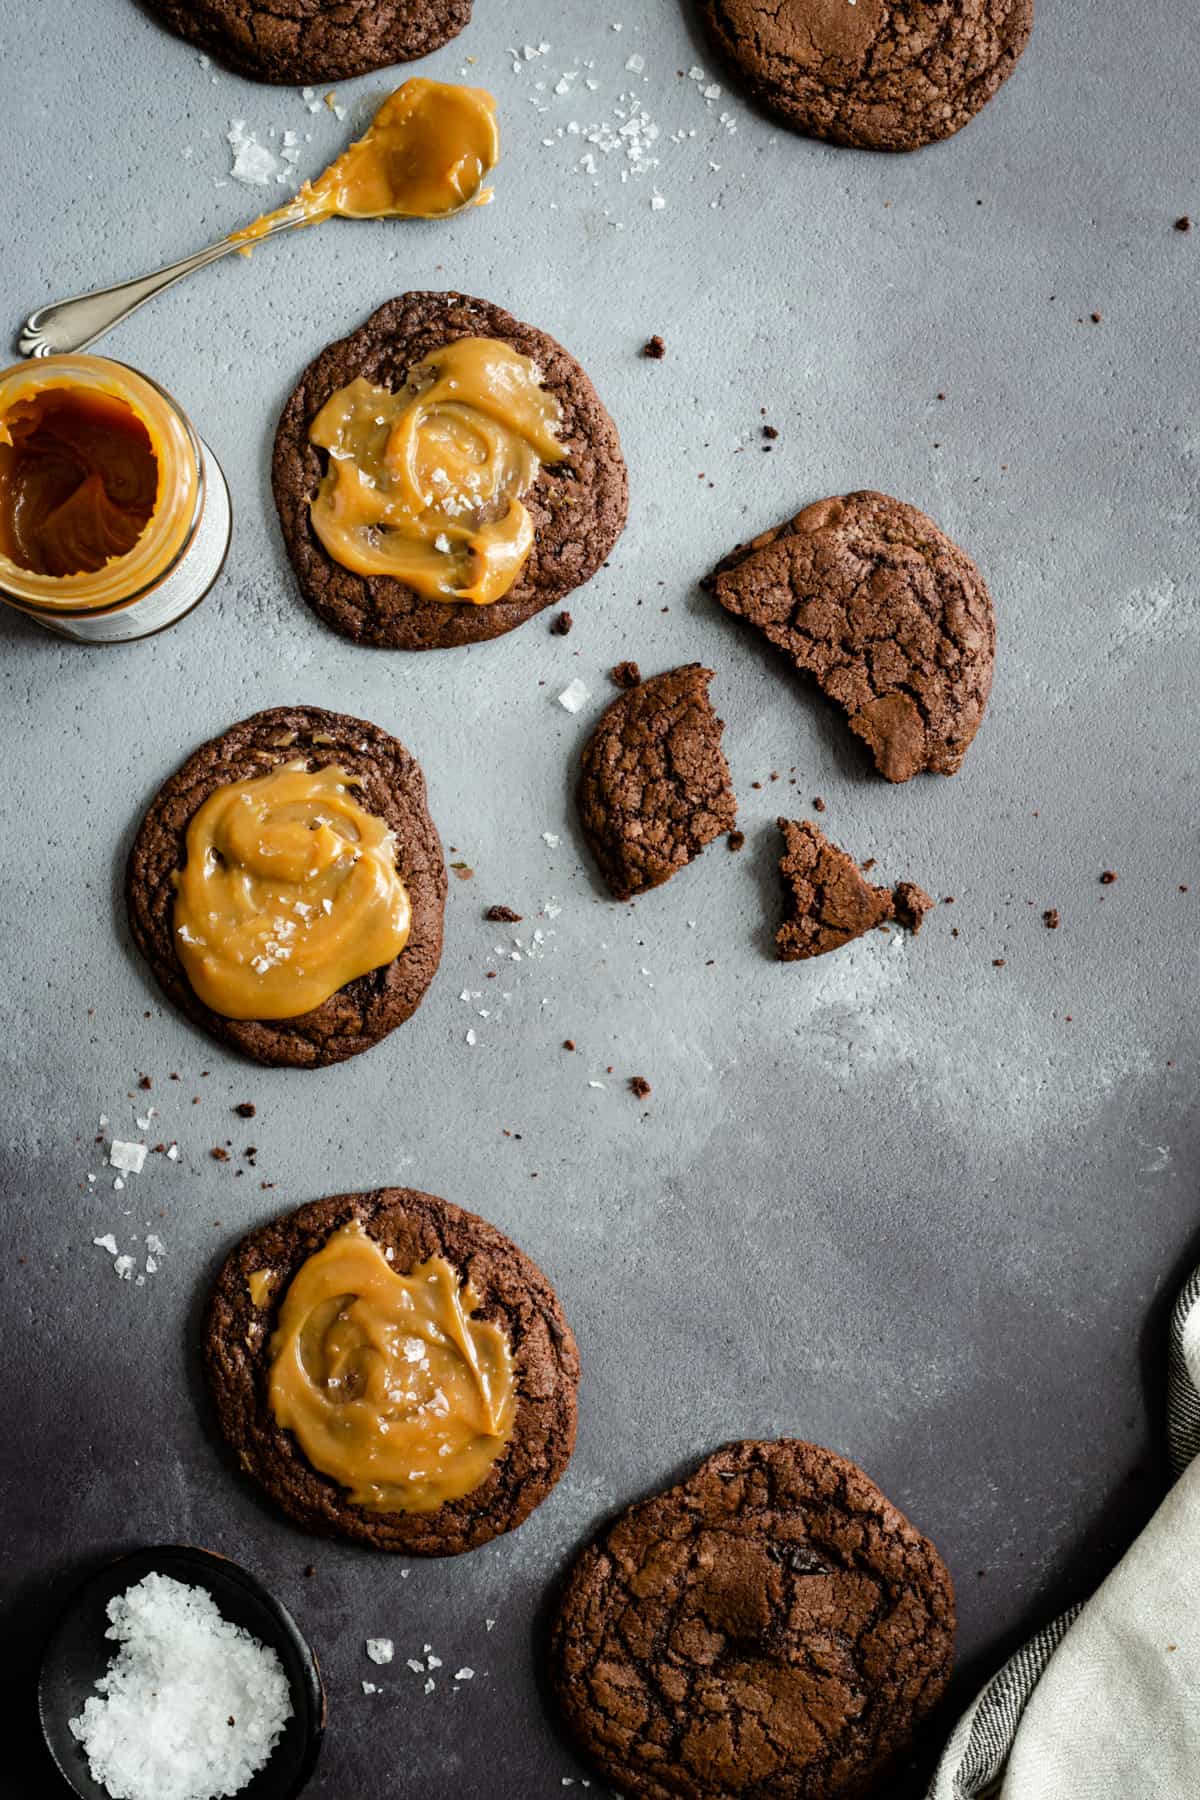 Overhead shot of chocolate salted caramel cookies with a small jar of caramel on site